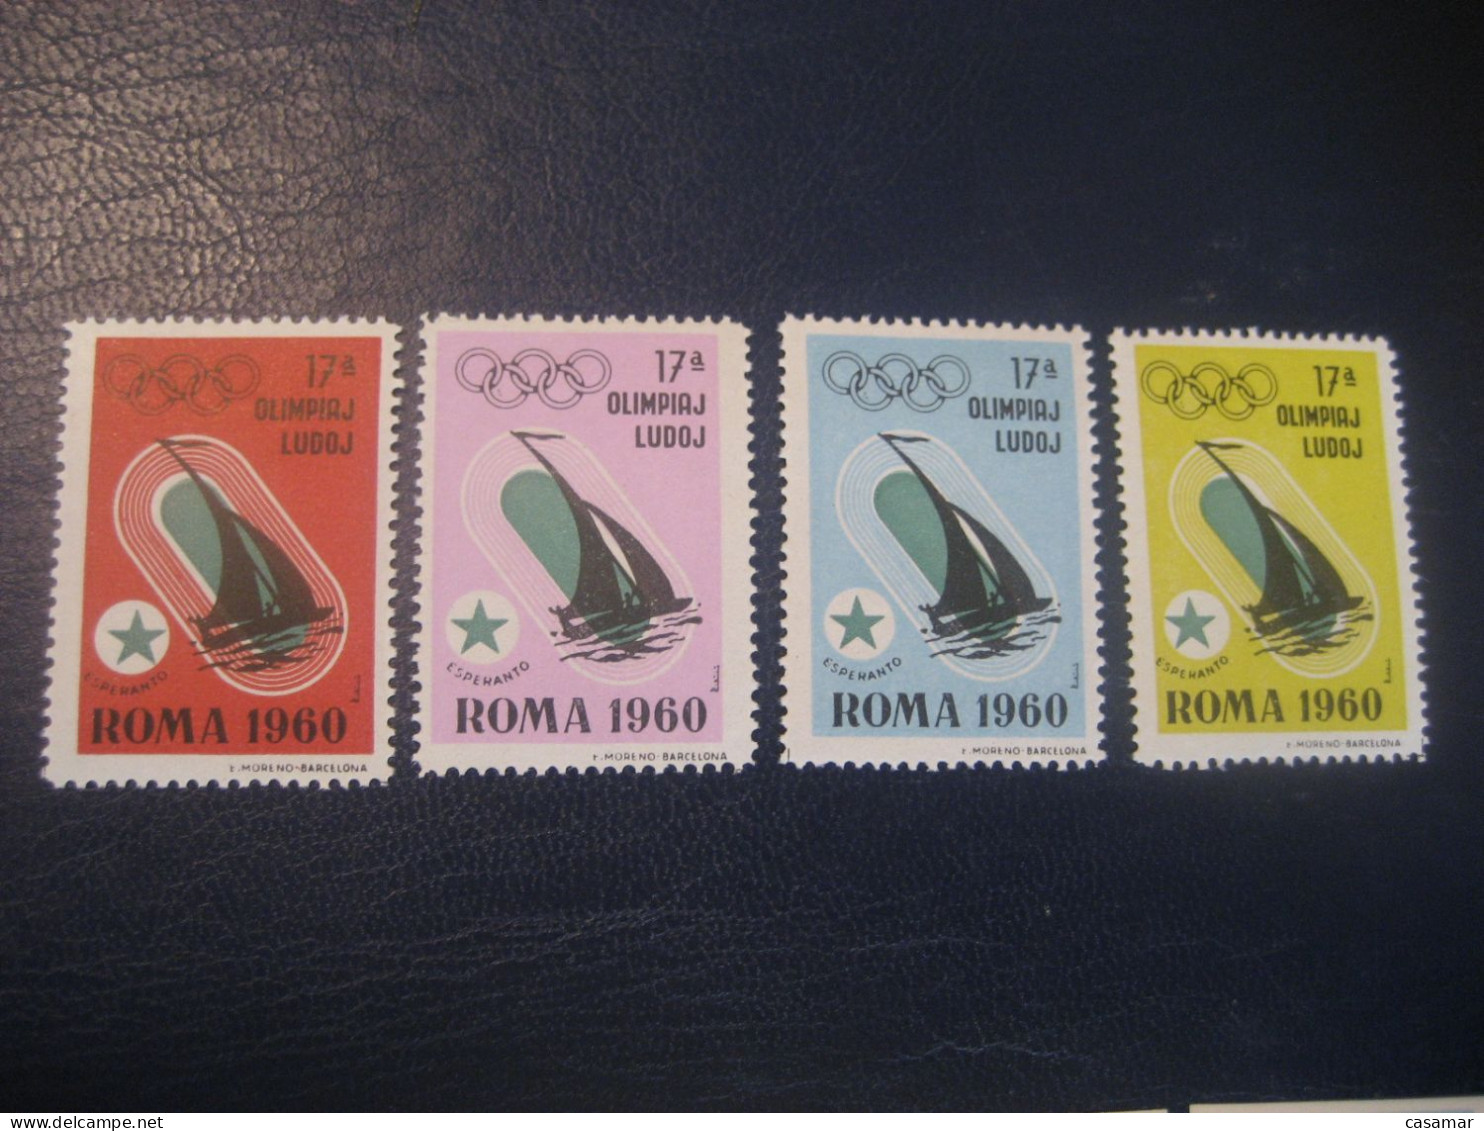 ROMA 1960 Sailing Voile Olympic Games Olympics Esperanto 4 Poster Stamp Vignette ITALY Spain Label - Sailing